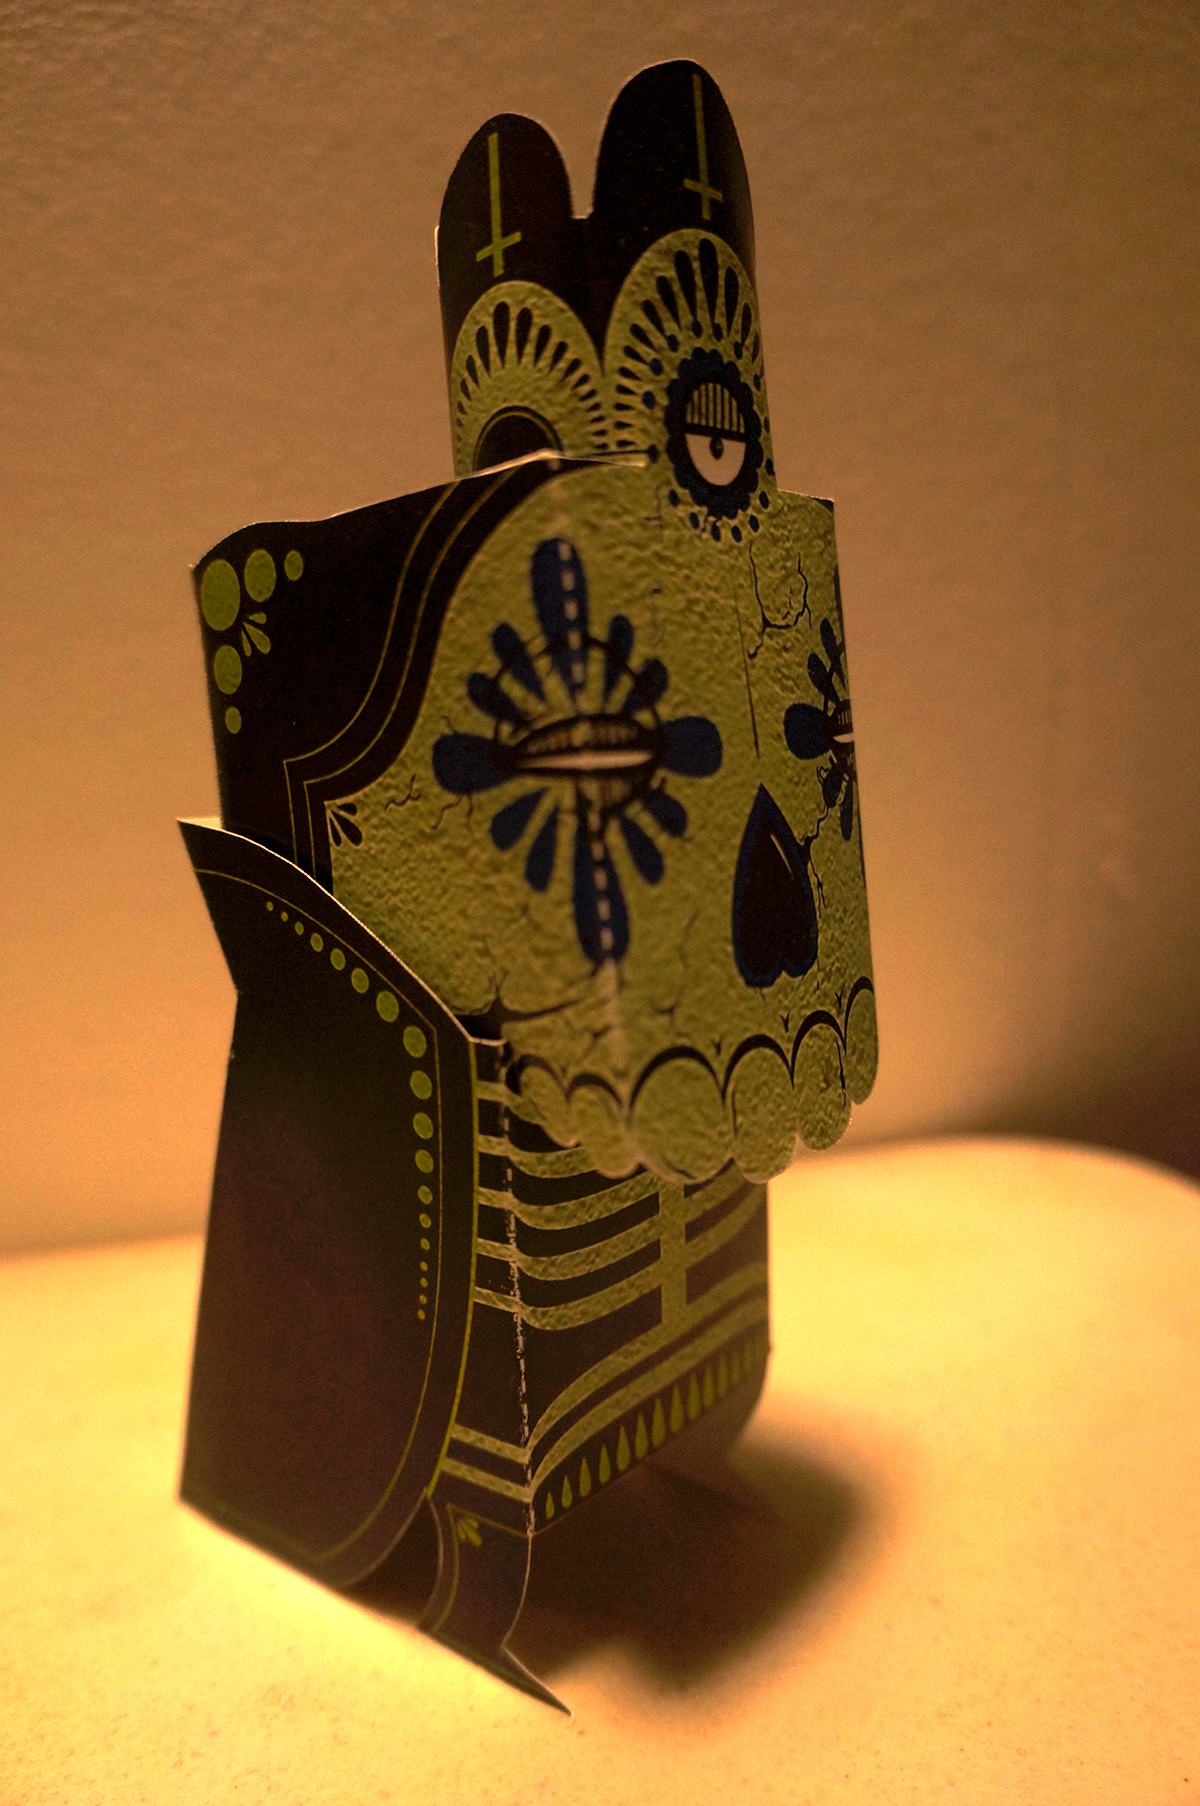 paper toy skull calavera count count skull toy art toy